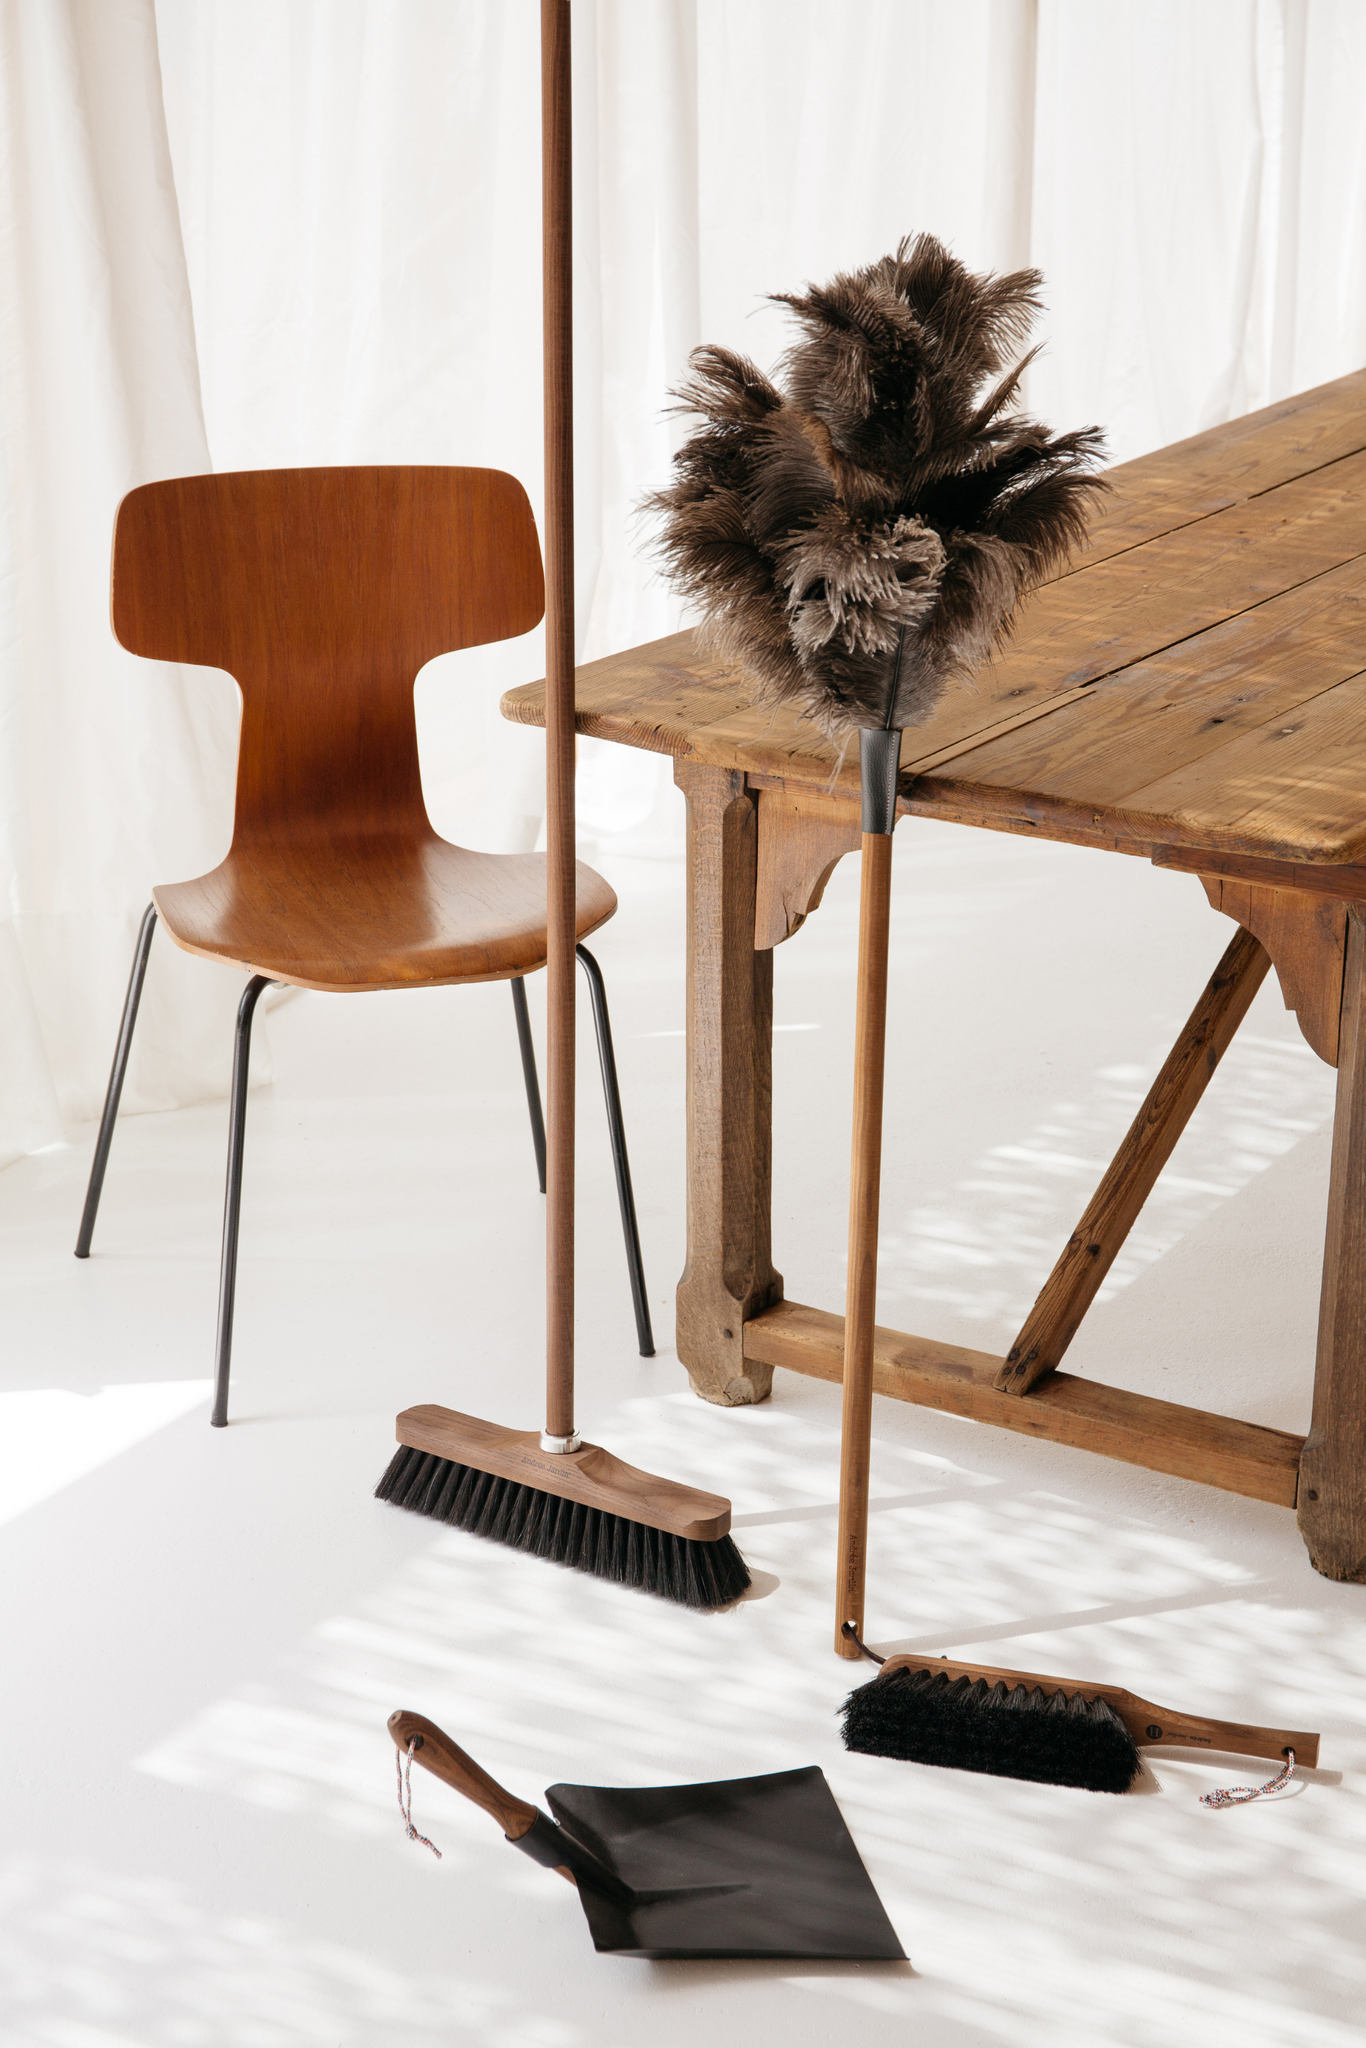 Feather duster with long wood handle next to wooden broom and hand brush as well as dustpan with wooden handle.